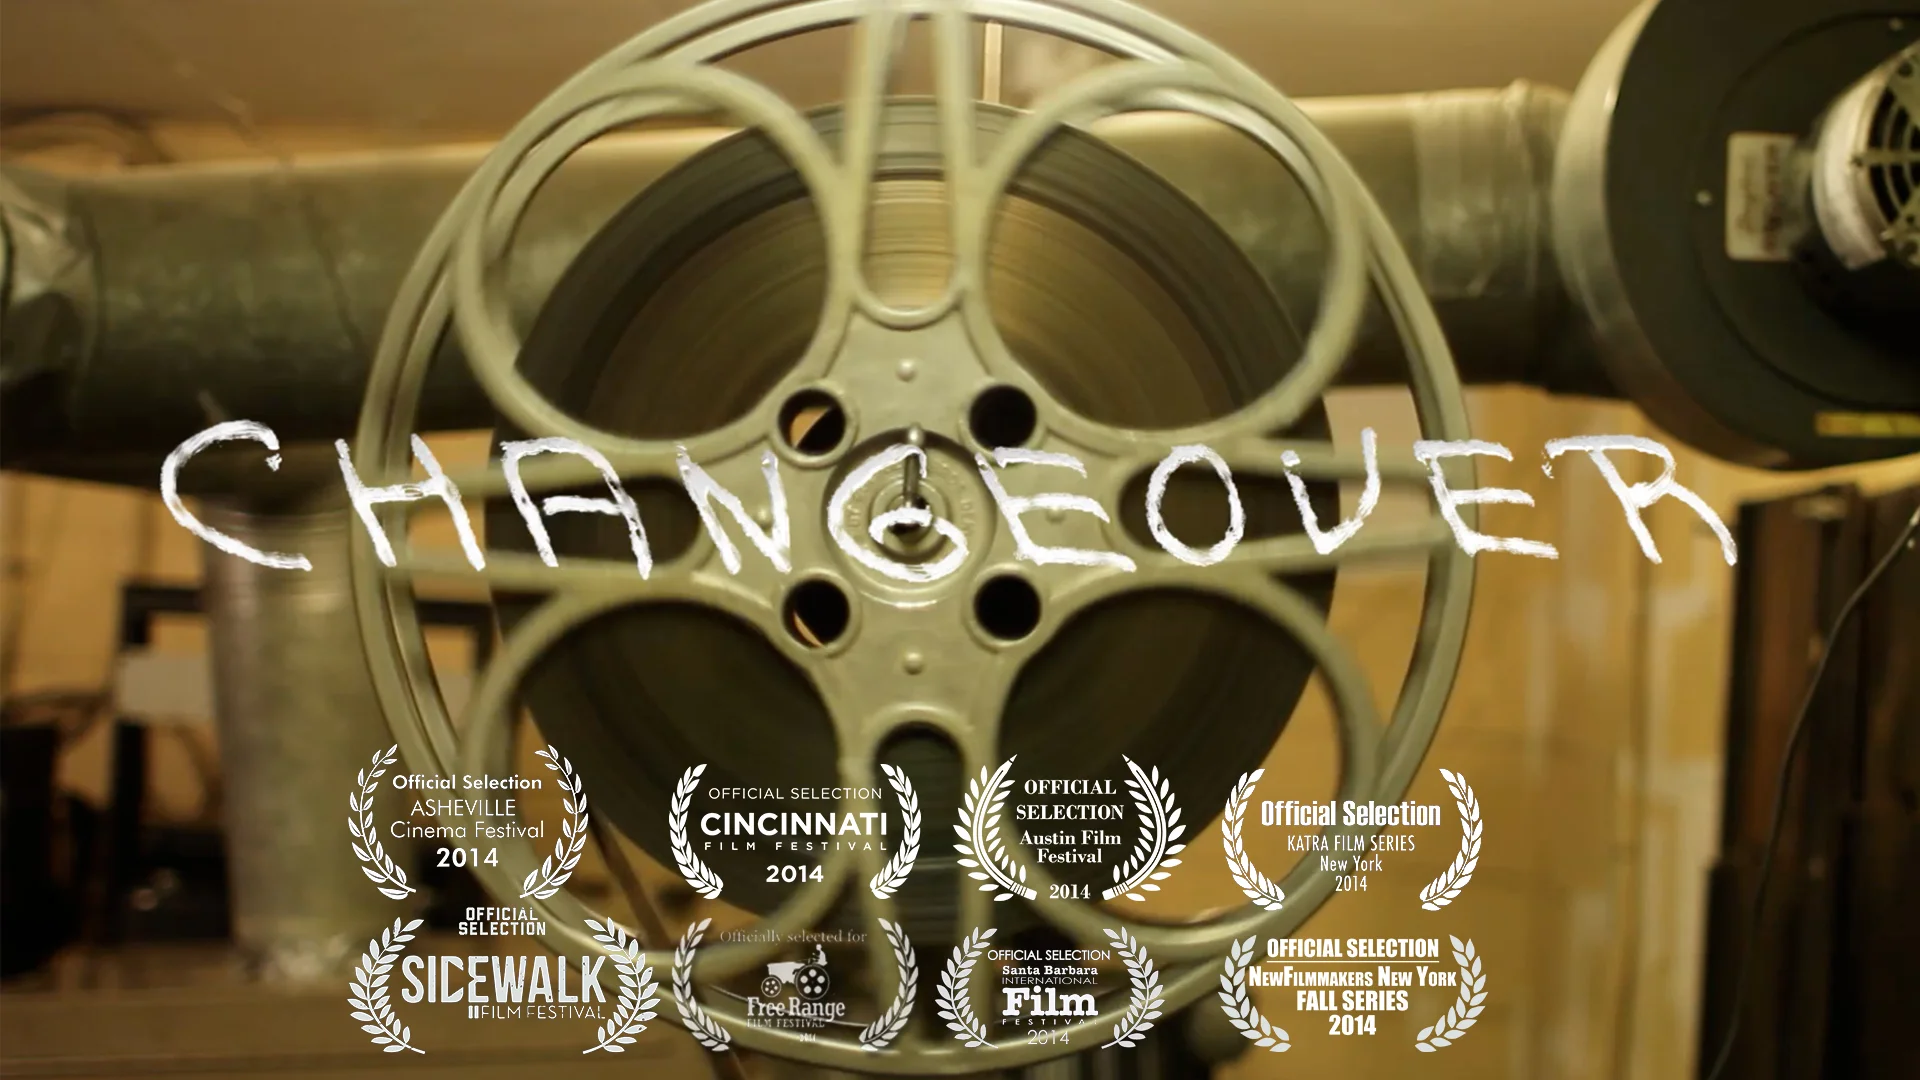 Changeover: A Short Documentary on Vimeo